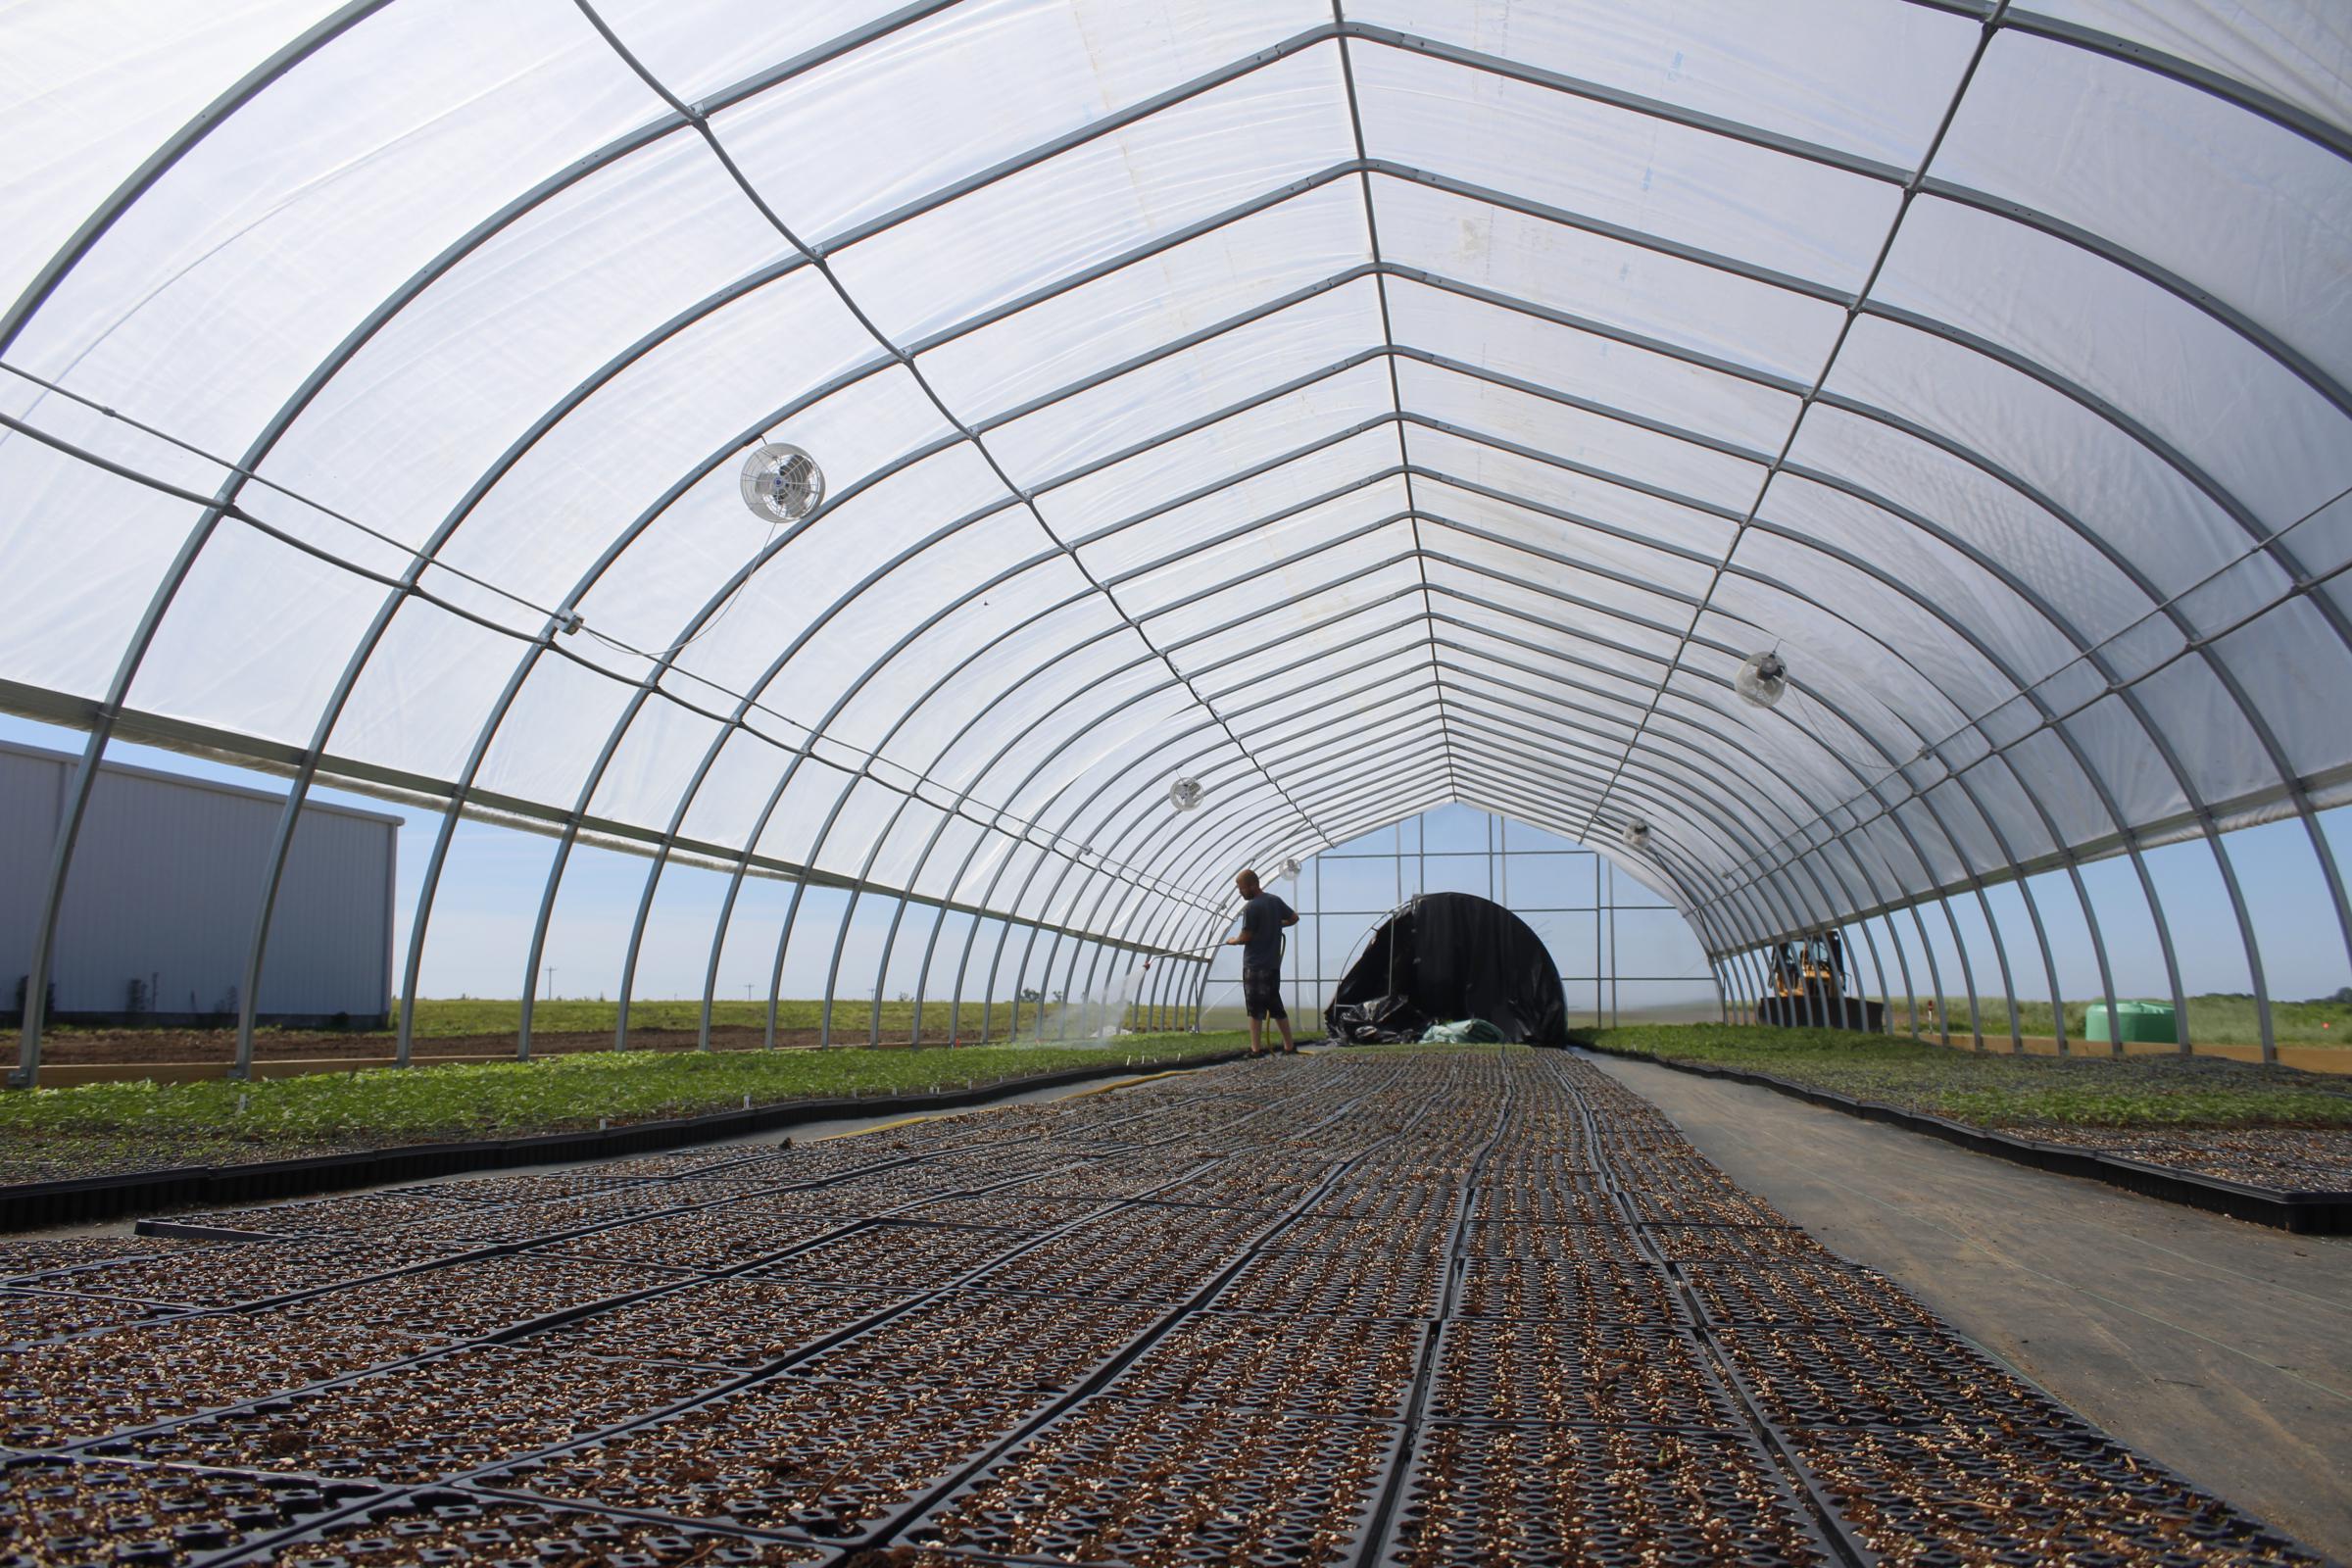 A large hoop house with a floor full of seedling flats.